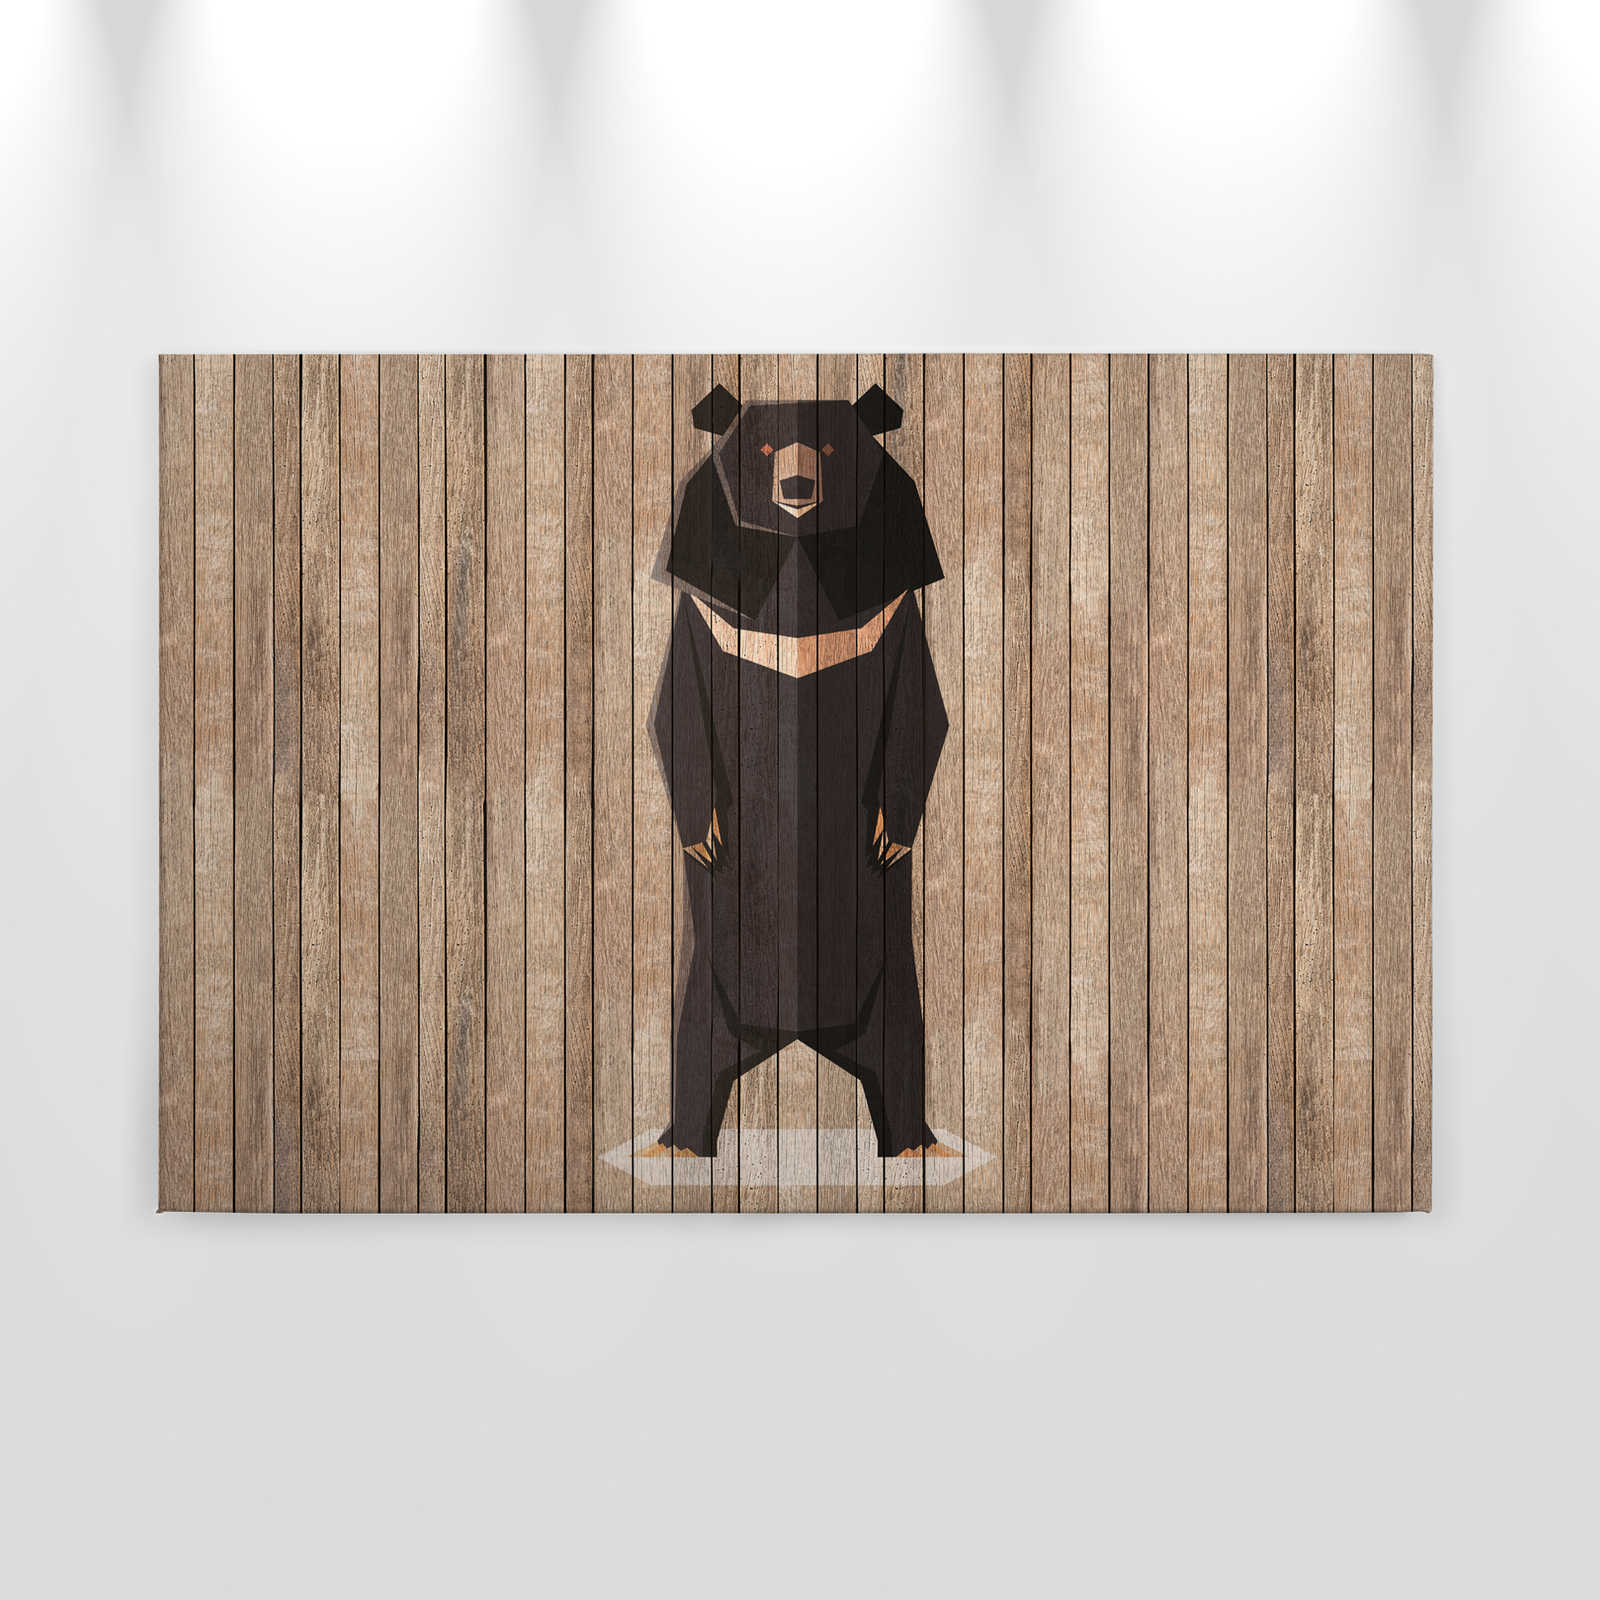             Born to Be Wild 1 - Canvas painting Board Wall with Bears - Wooden panels wide - 0.90 m x 0.60 m
        